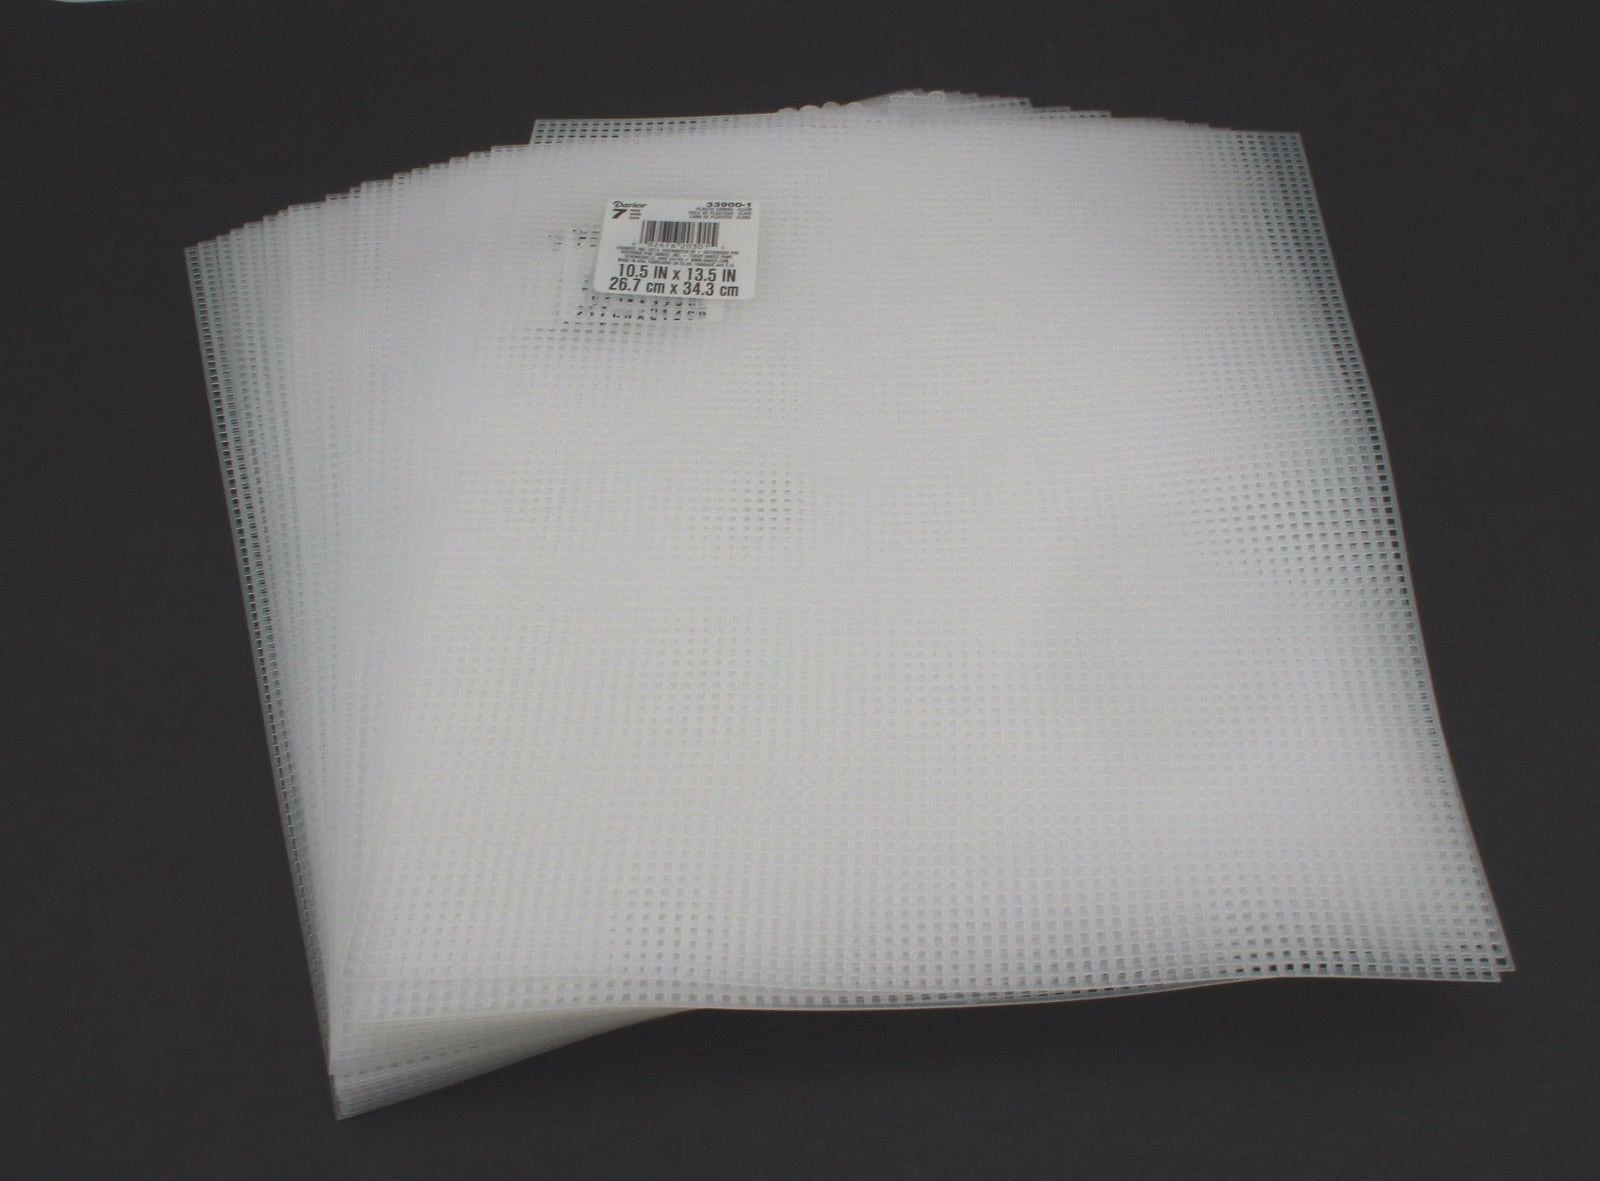 7 Mesh Count Clear Plastic Canvas 3 Sheets 10.5 x 13.5 Inches